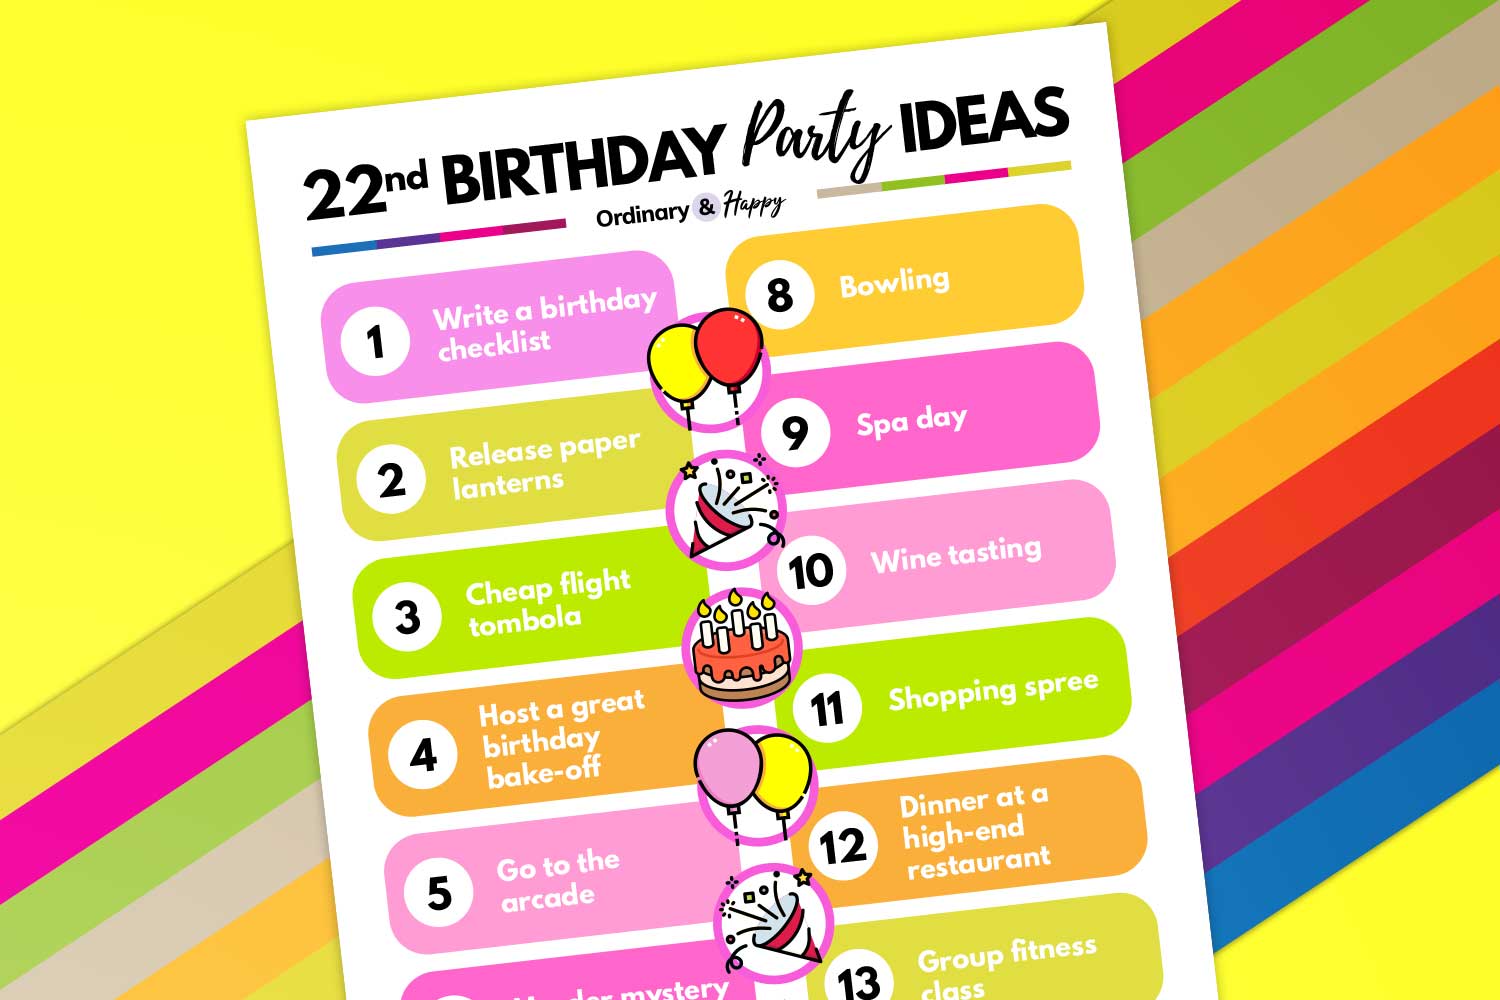 Best 22nd Birthday Ideas (Fun Things to do for your 22nd Birthday) - Ordinary and Happy